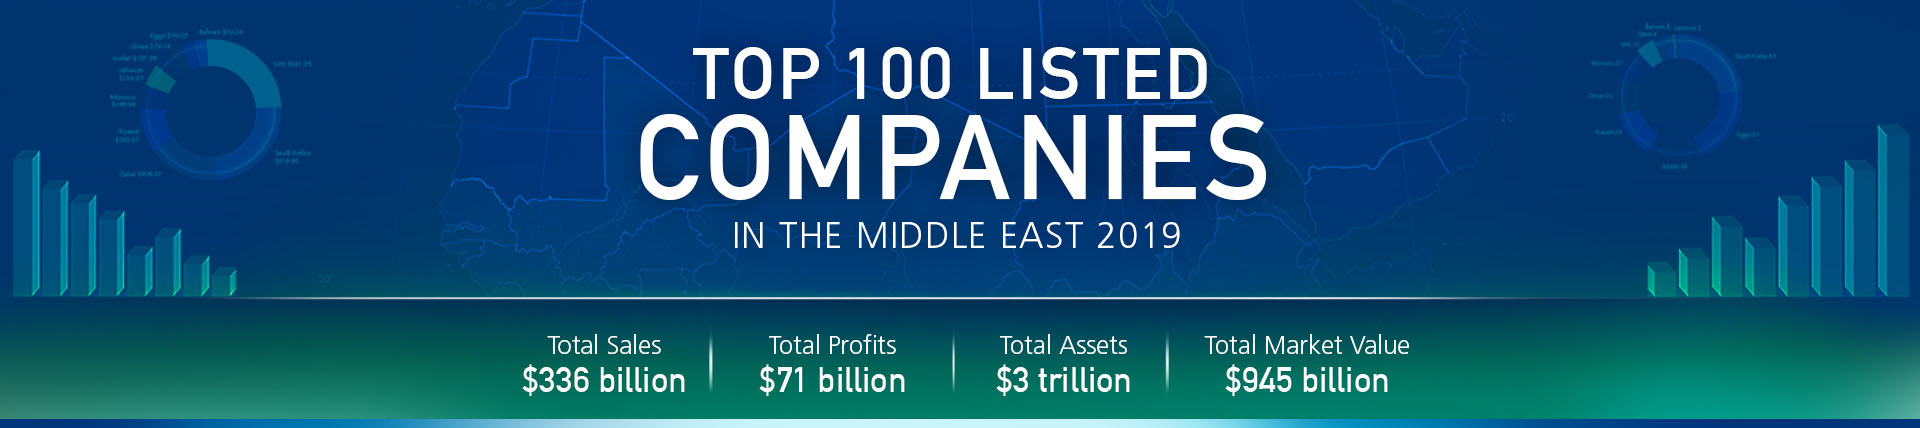 Top 100 Listed Companies In The Middle East 2019